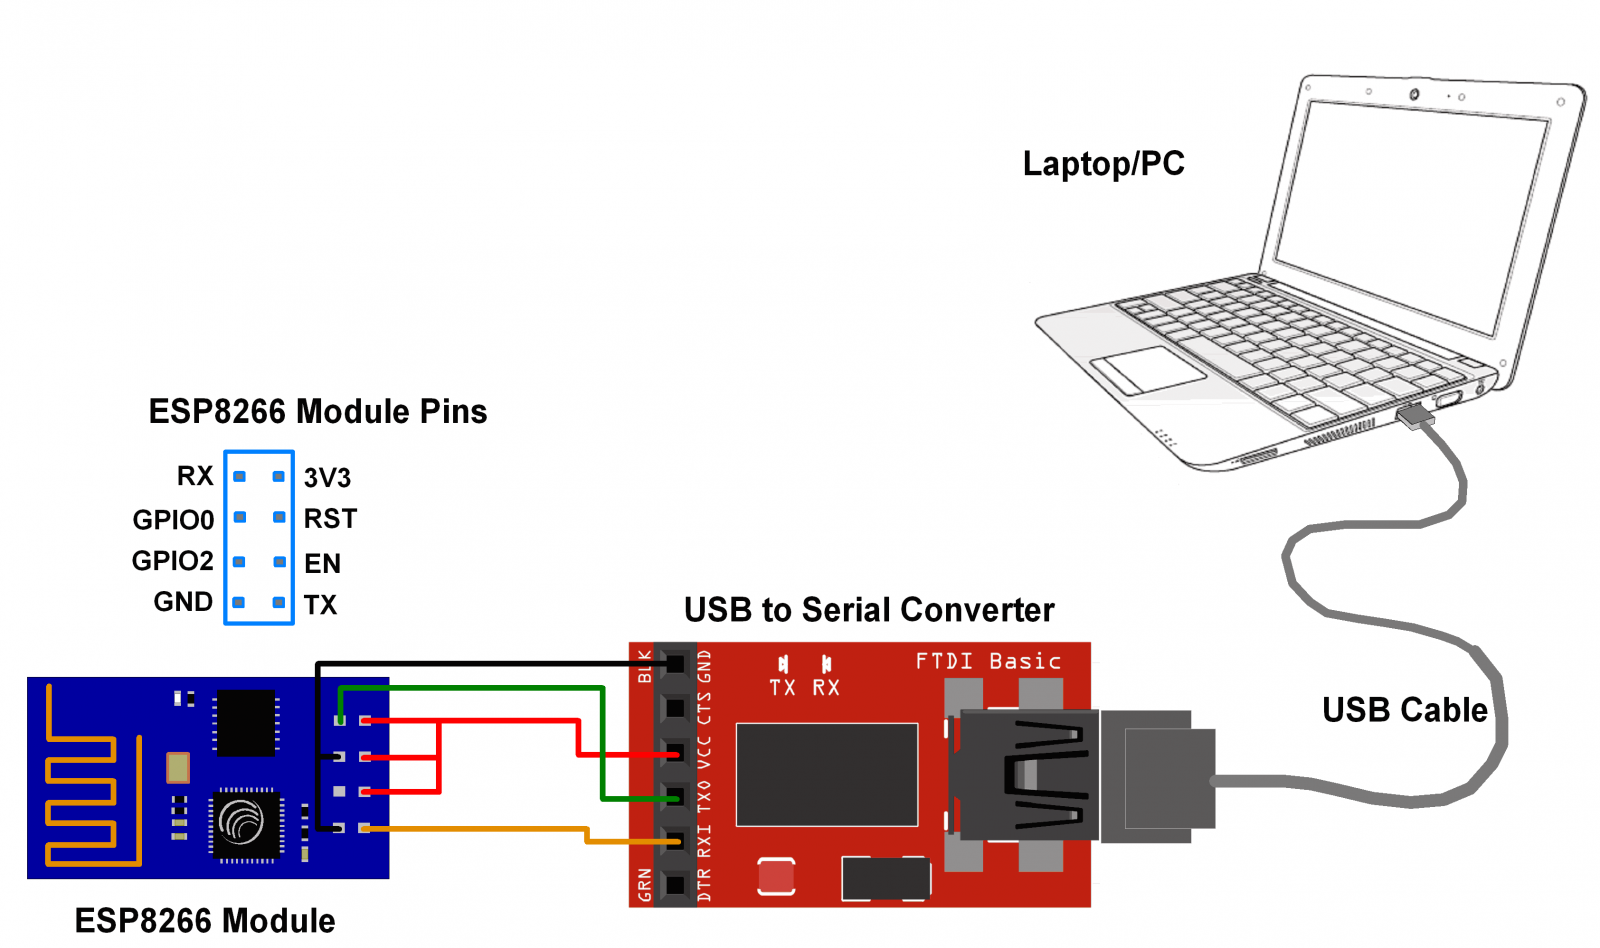 ESP8266 Module Serial Connection with PC